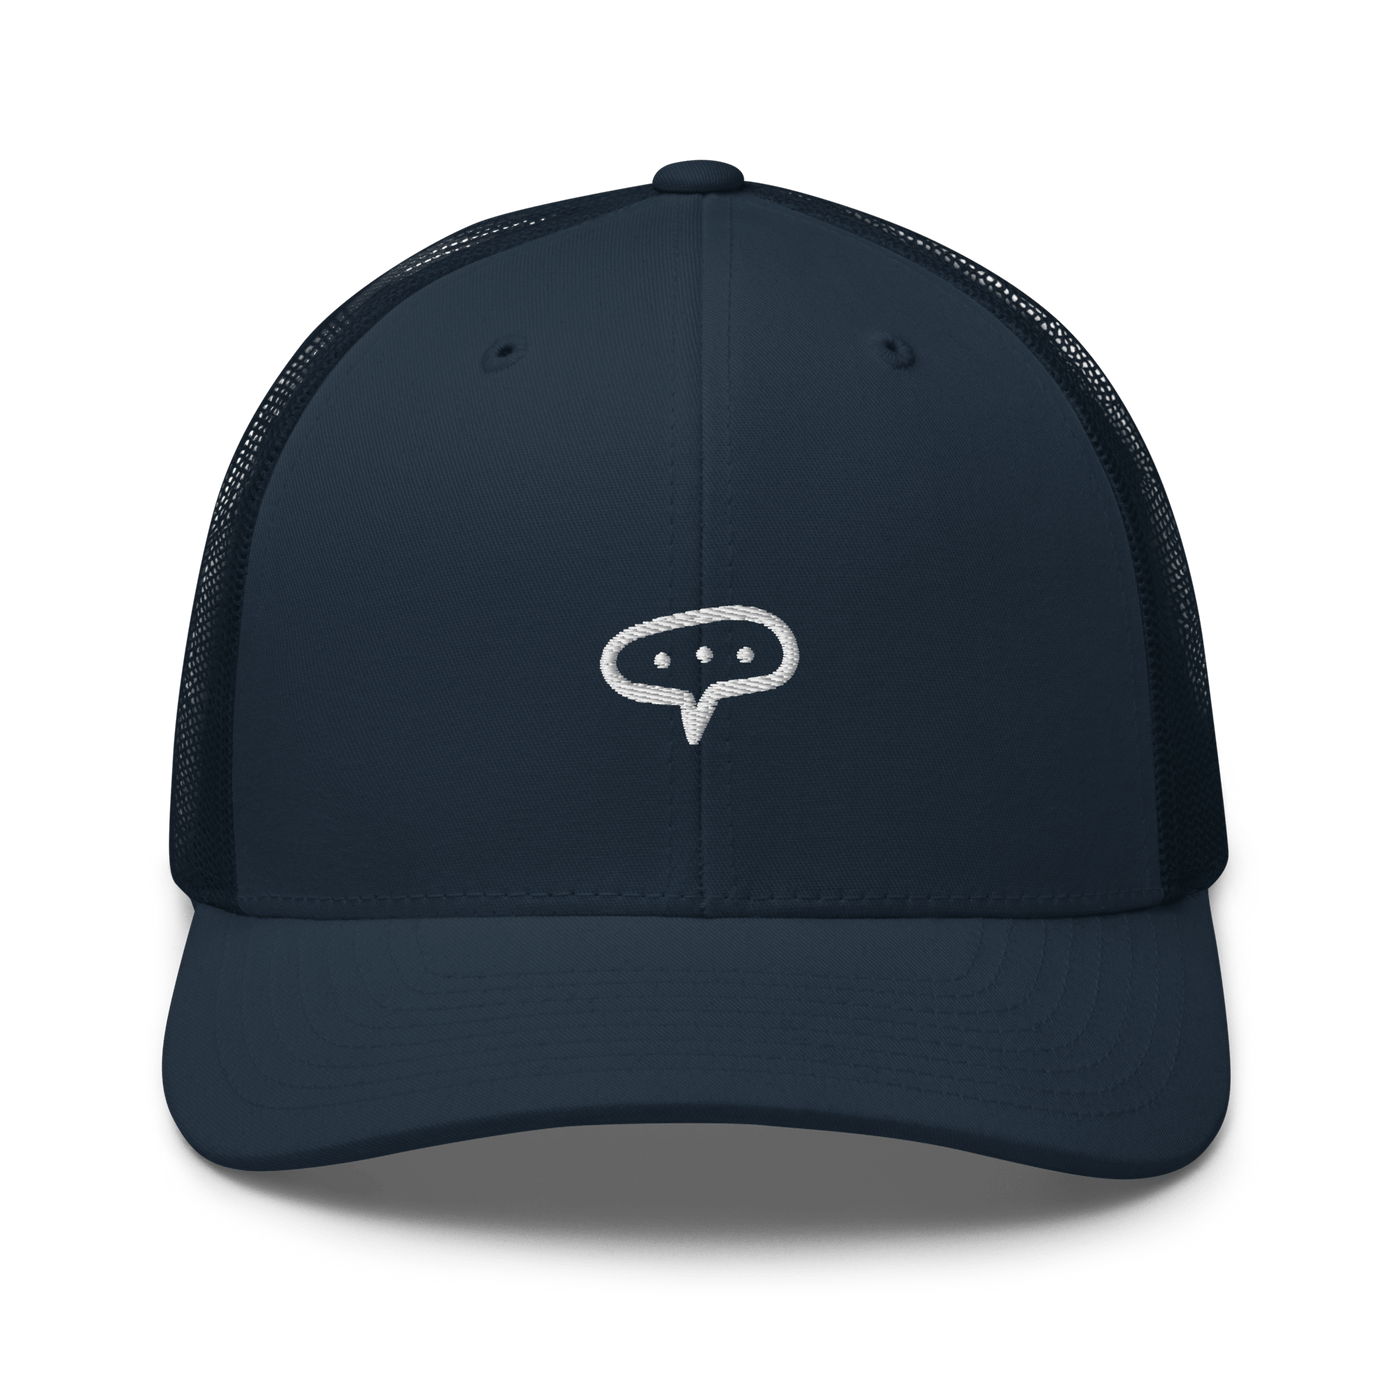 Thinking Trucker Cap - Navy - - Just Another Cap Store